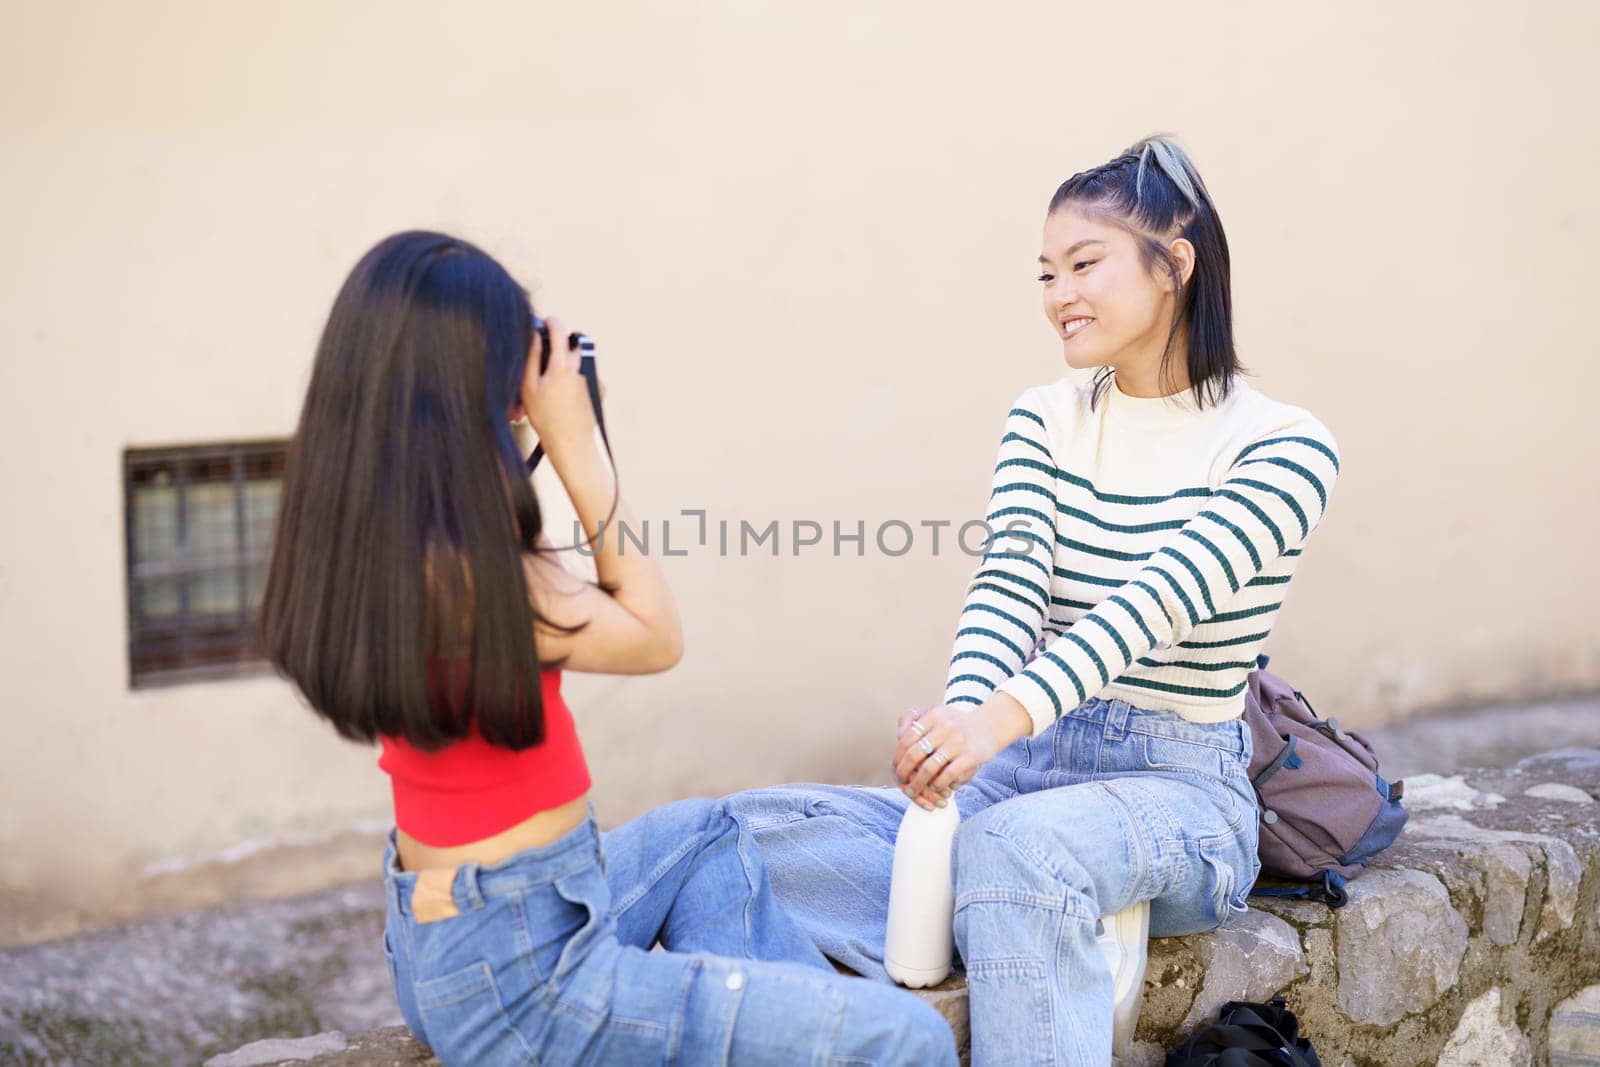 Young Chinese woman photographer taking photo of girlfriend showing peace gesture on city street during vacation